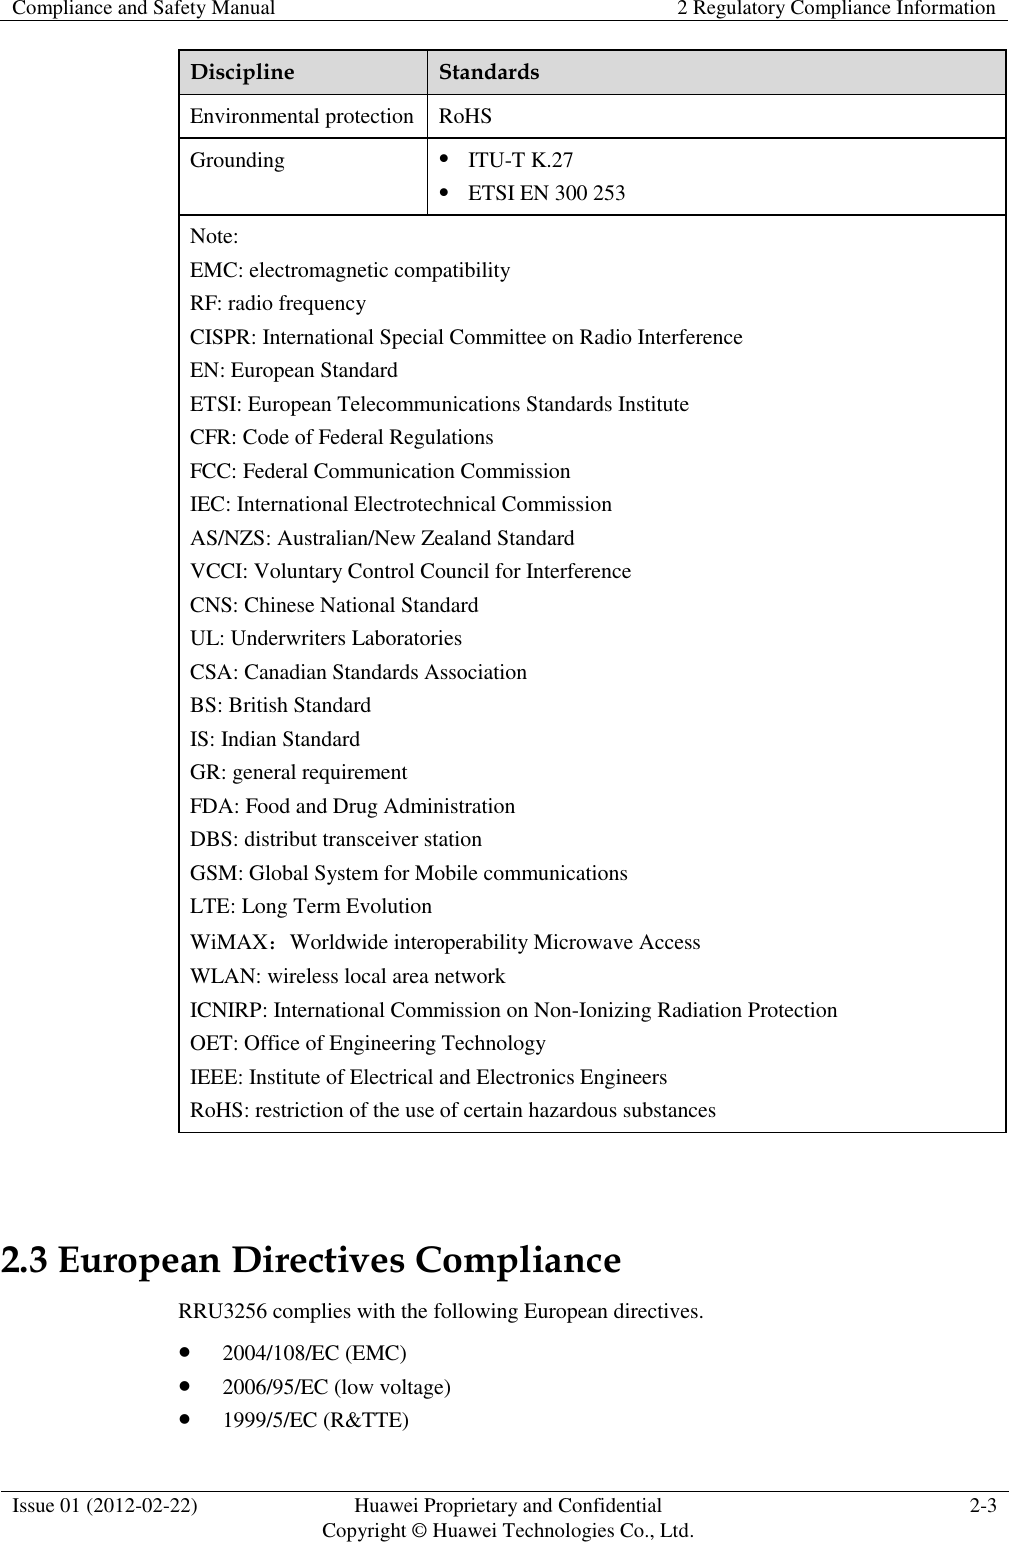 Compliance and Safety Manual 2 Regulatory Compliance Information  Issue 01 (2012-02-22) Huawei Proprietary and Confidential           Copyright © Huawei Technologies Co., Ltd. 2-3  Discipline Standards Environmental protection RoHS Grounding  ITU-T K.27  ETSI EN 300 253 Note: EMC: electromagnetic compatibility RF: radio frequency CISPR: International Special Committee on Radio Interference EN: European Standard ETSI: European Telecommunications Standards Institute CFR: Code of Federal Regulations FCC: Federal Communication Commission IEC: International Electrotechnical Commission AS/NZS: Australian/New Zealand Standard VCCI: Voluntary Control Council for Interference CNS: Chinese National Standard UL: Underwriters Laboratories CSA: Canadian Standards Association BS: British Standard IS: Indian Standard GR: general requirement FDA: Food and Drug Administration DBS: distribut transceiver station GSM: Global System for Mobile communications LTE: Long Term Evolution WiMAX：Worldwide interoperability Microwave Access WLAN: wireless local area network ICNIRP: International Commission on Non-Ionizing Radiation Protection OET: Office of Engineering Technology IEEE: Institute of Electrical and Electronics Engineers RoHS: restriction of the use of certain hazardous substances  2.3 European Directives Compliance RRU3256 complies with the following European directives.    2004/108/EC (EMC)  2006/95/EC (low voltage)  1999/5/EC (R&amp;TTE) 